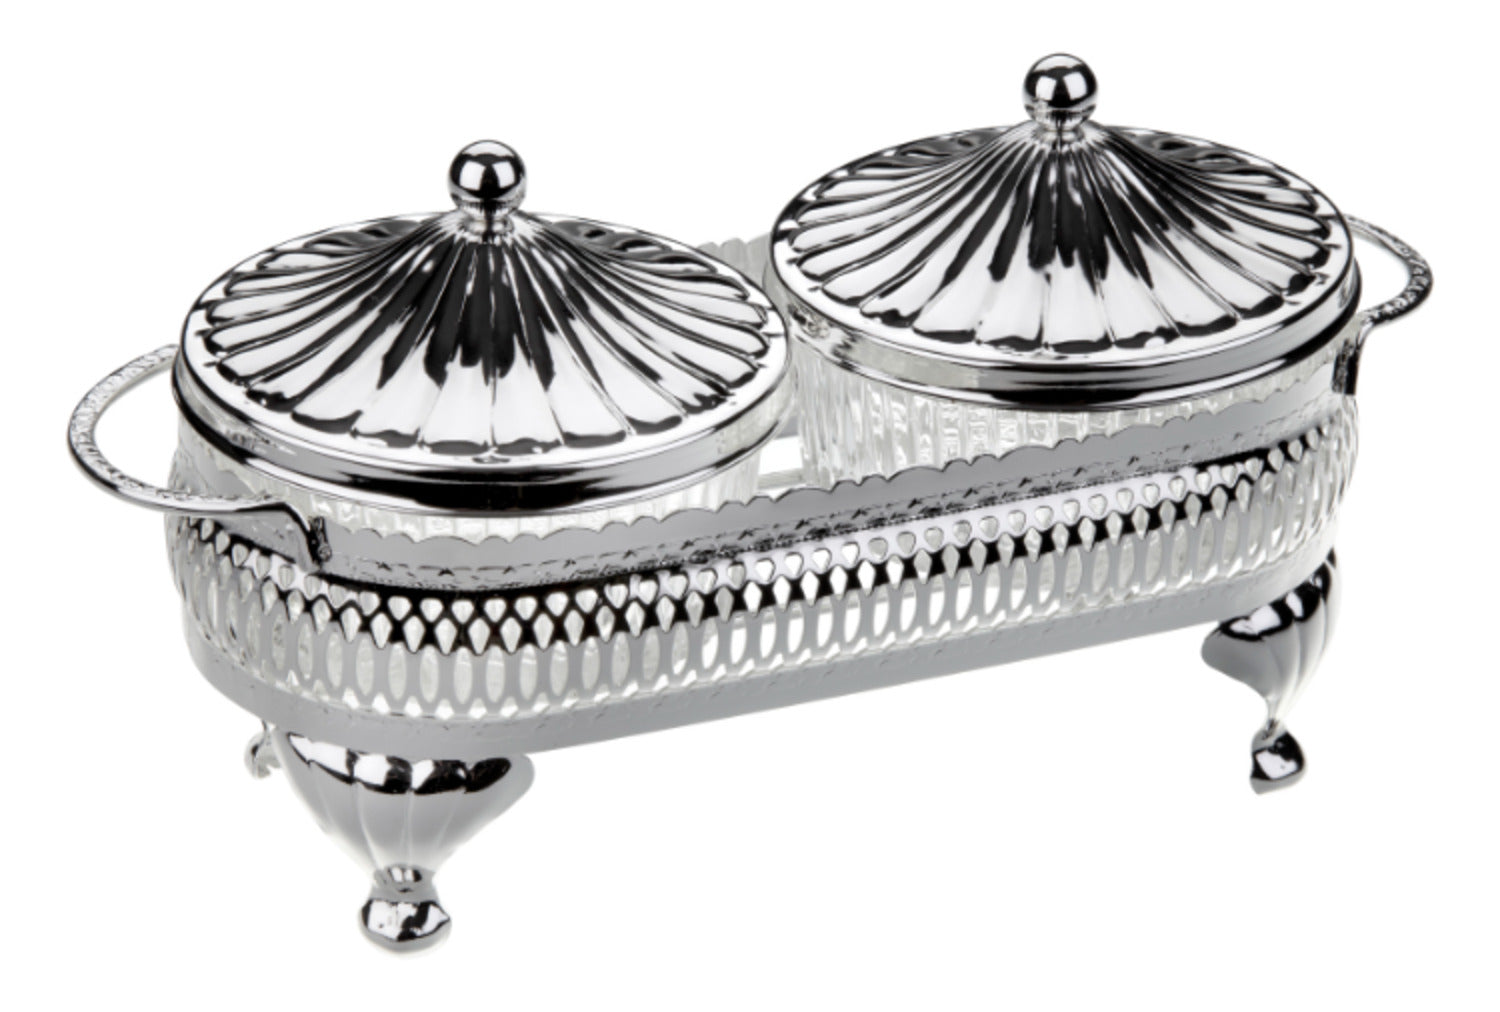 Queen Anne Round Bowl Set, 2 Pieces -23x11cm -Silver Plated